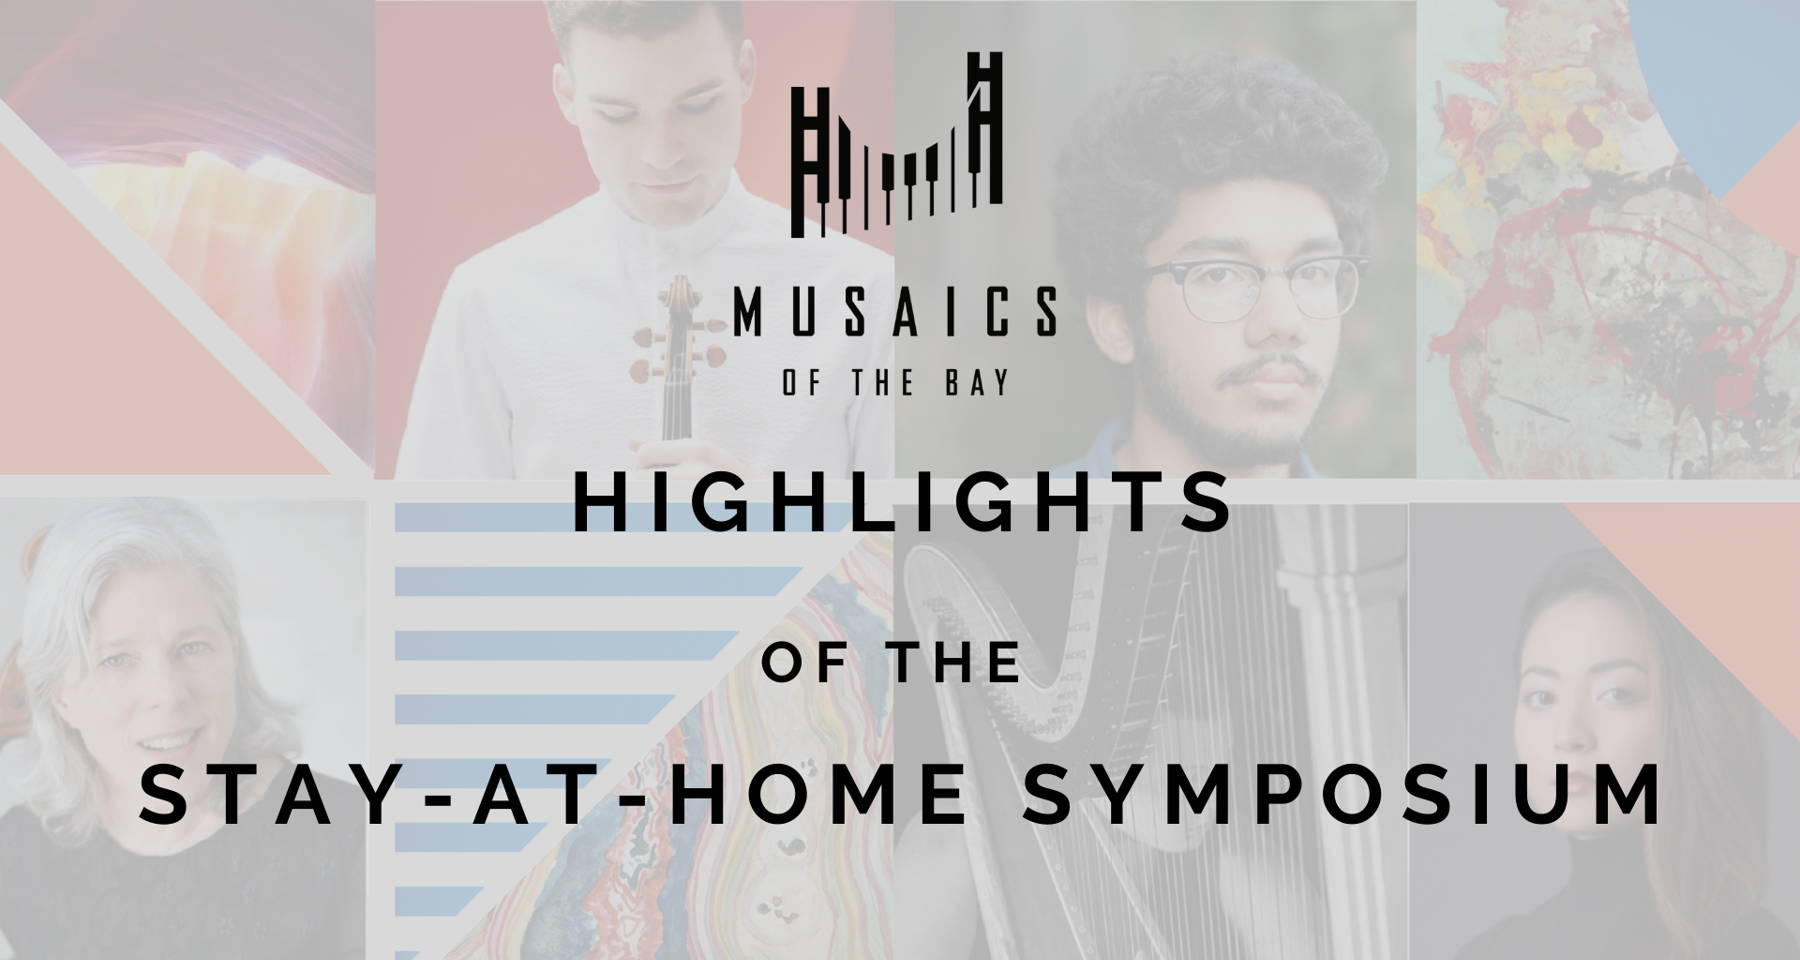 Highlights of the Stay-at-Home Symposium